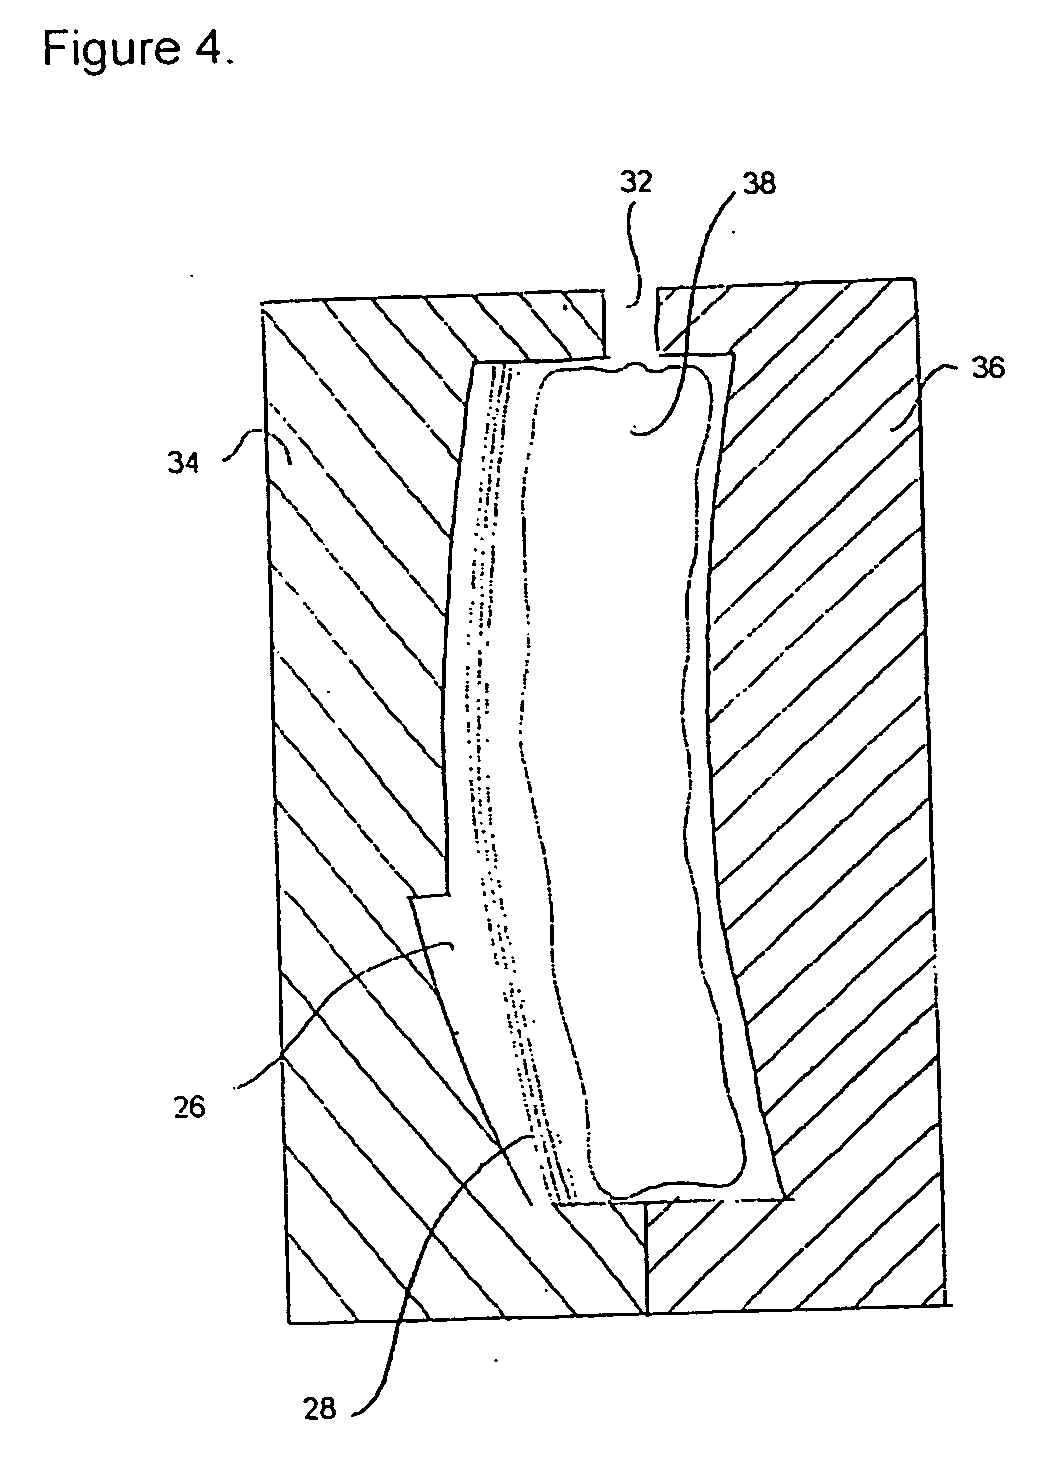 Laminated functional wafer for plastic optical elements